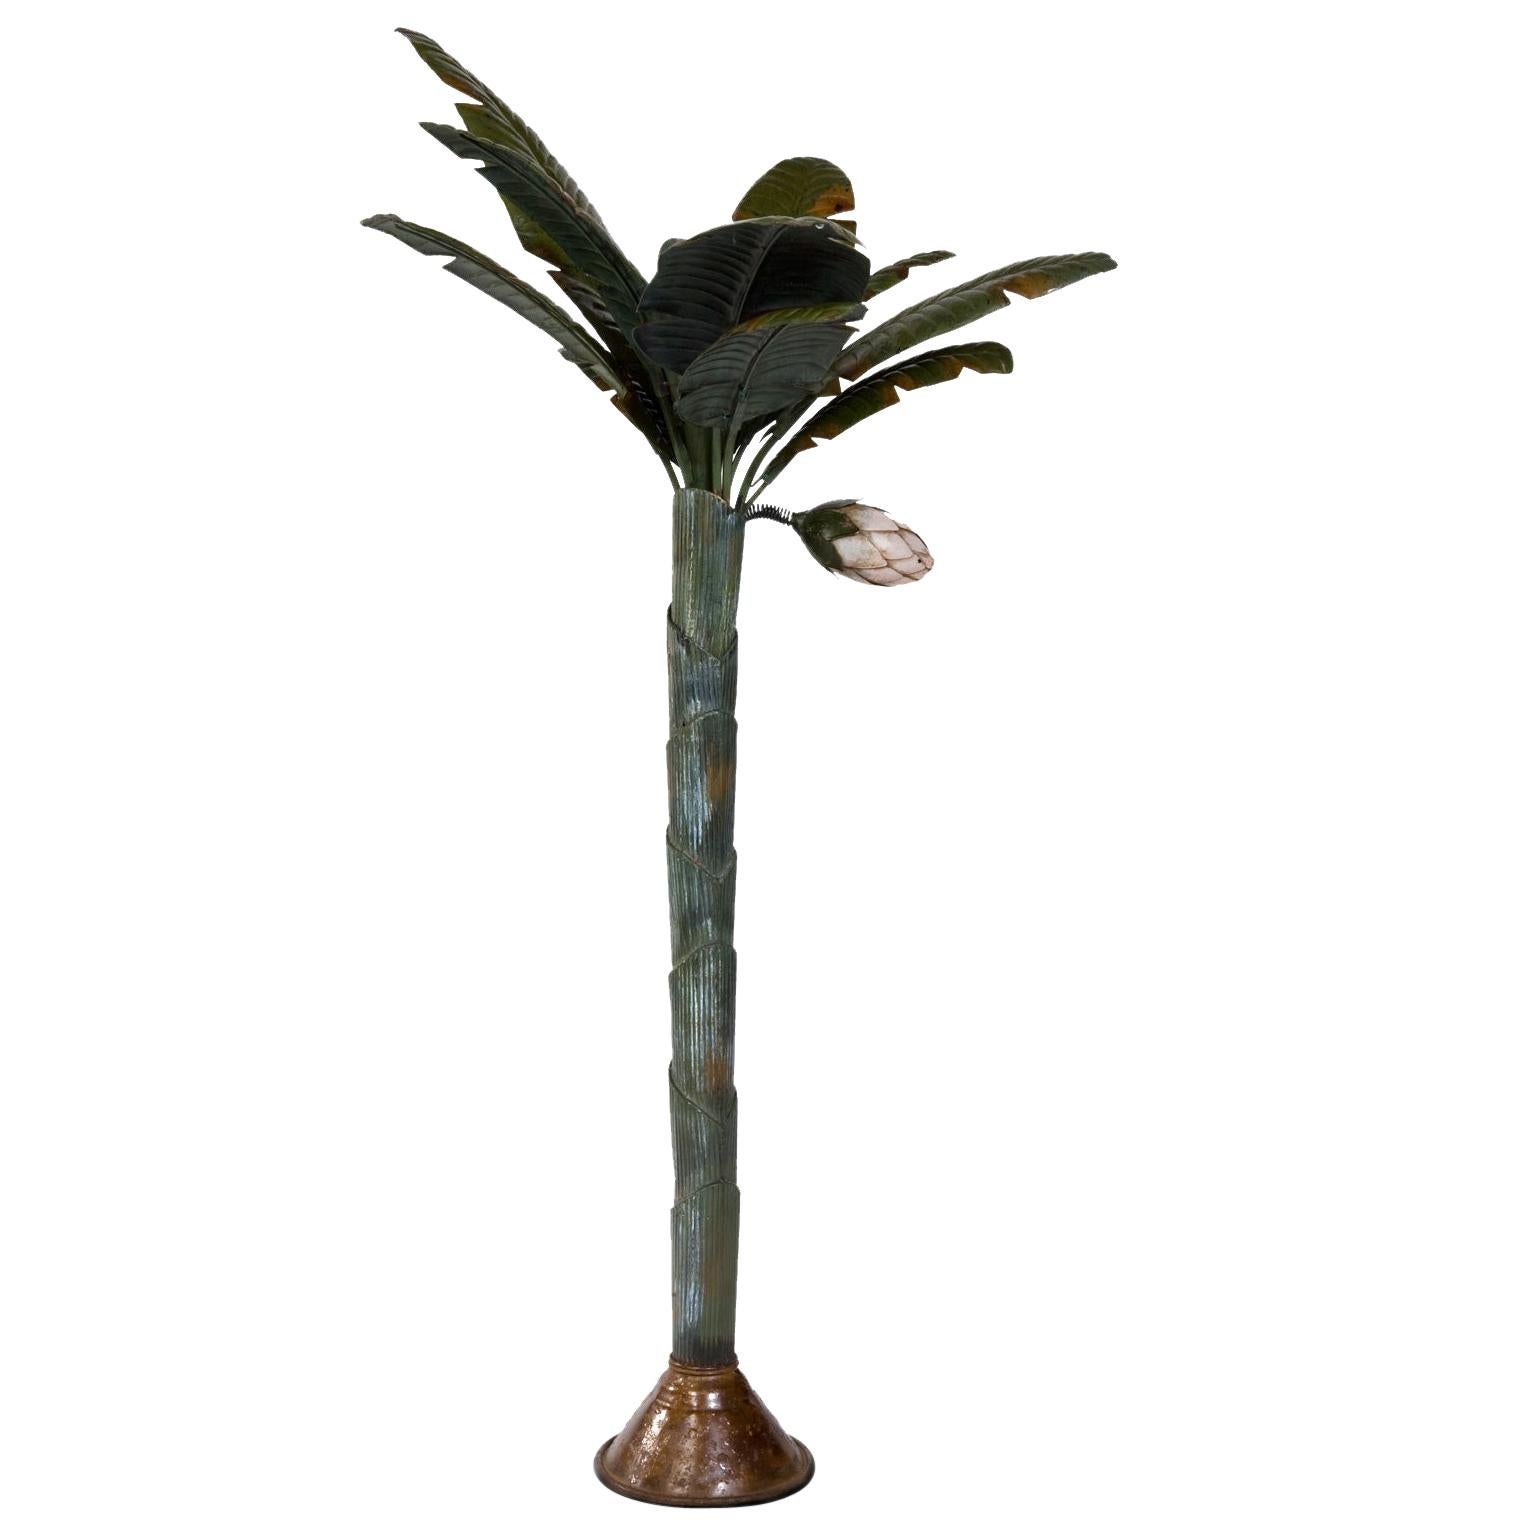 Painted Metal Sculpture of Palm or Banana Tree and Flower